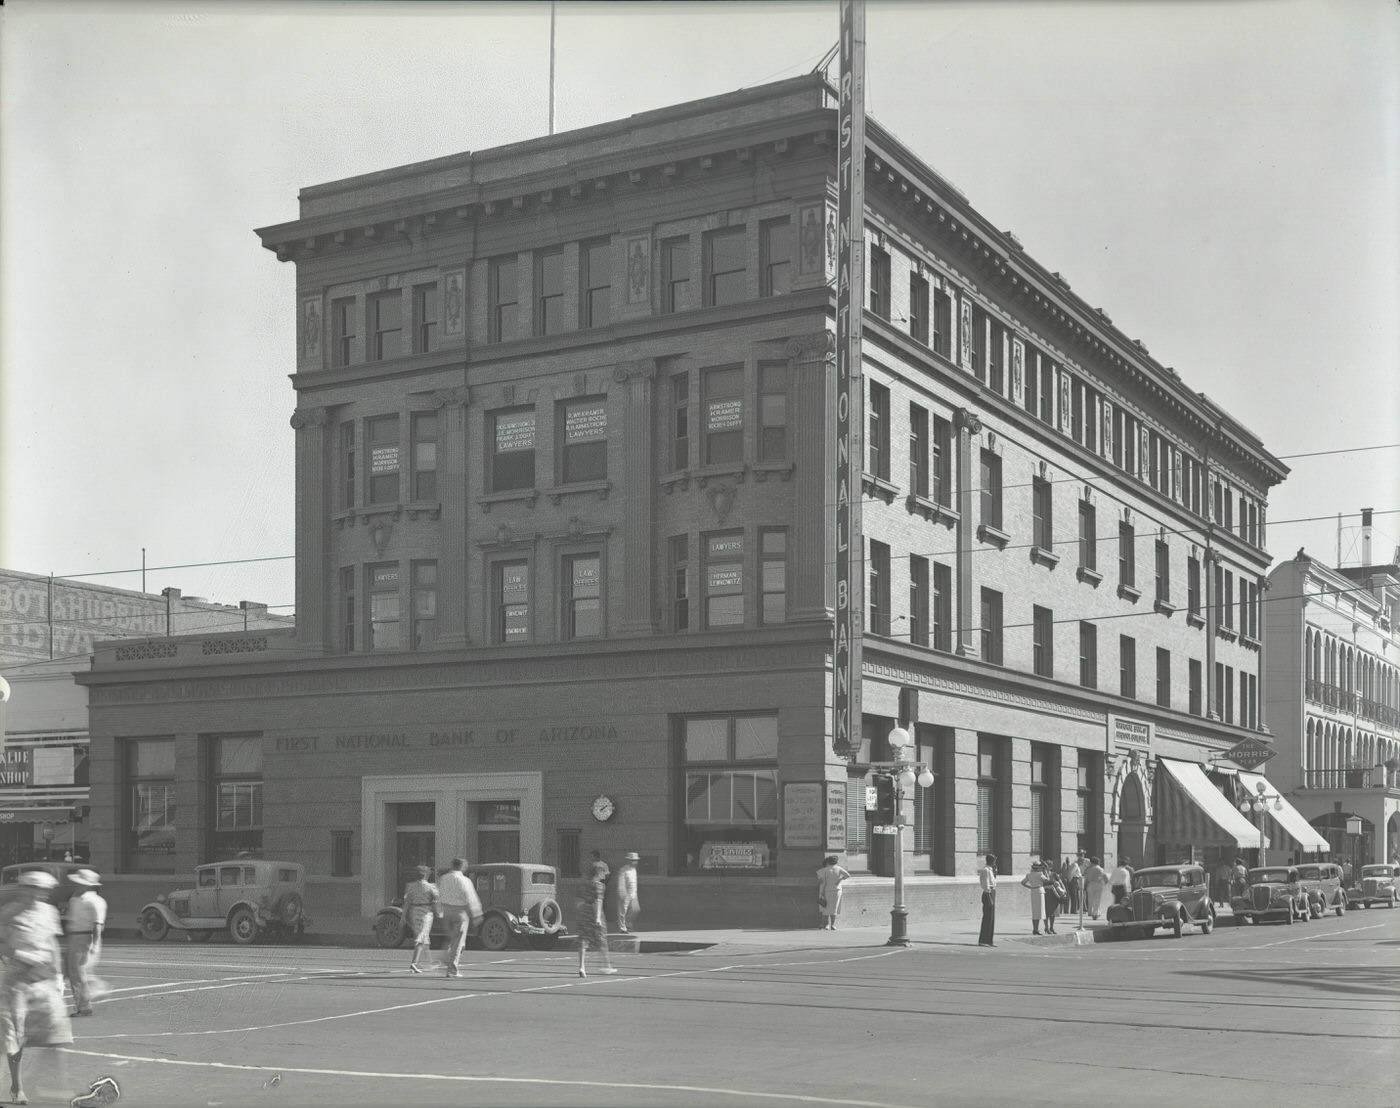 First National Bank Building Exterior, 1930s. This bank was located at Central Ave. and Washington St. in Phoenix.